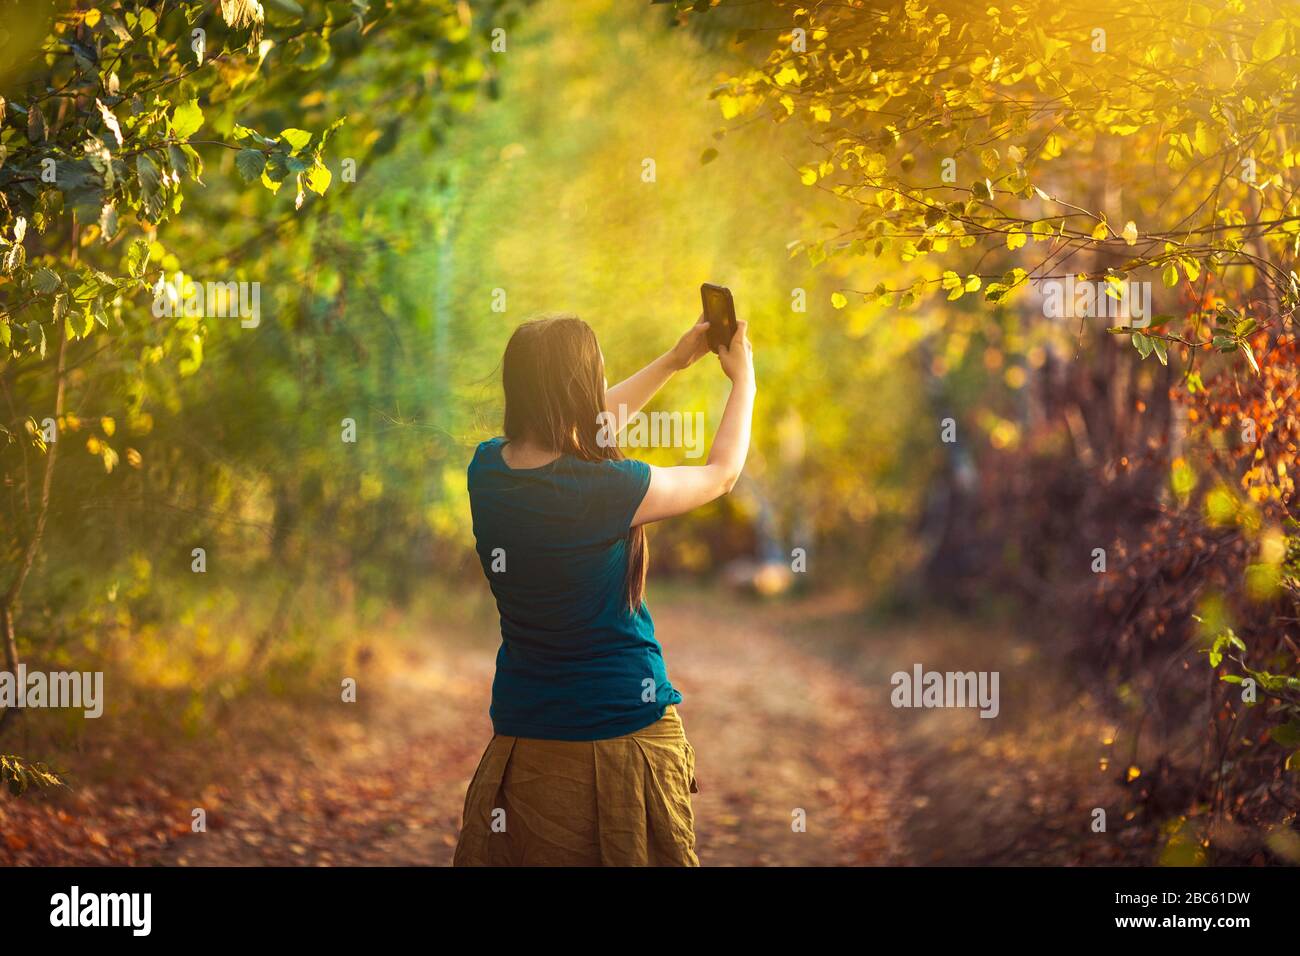 Girl taking photo using mobile phone, early autumn colors Stock Photo